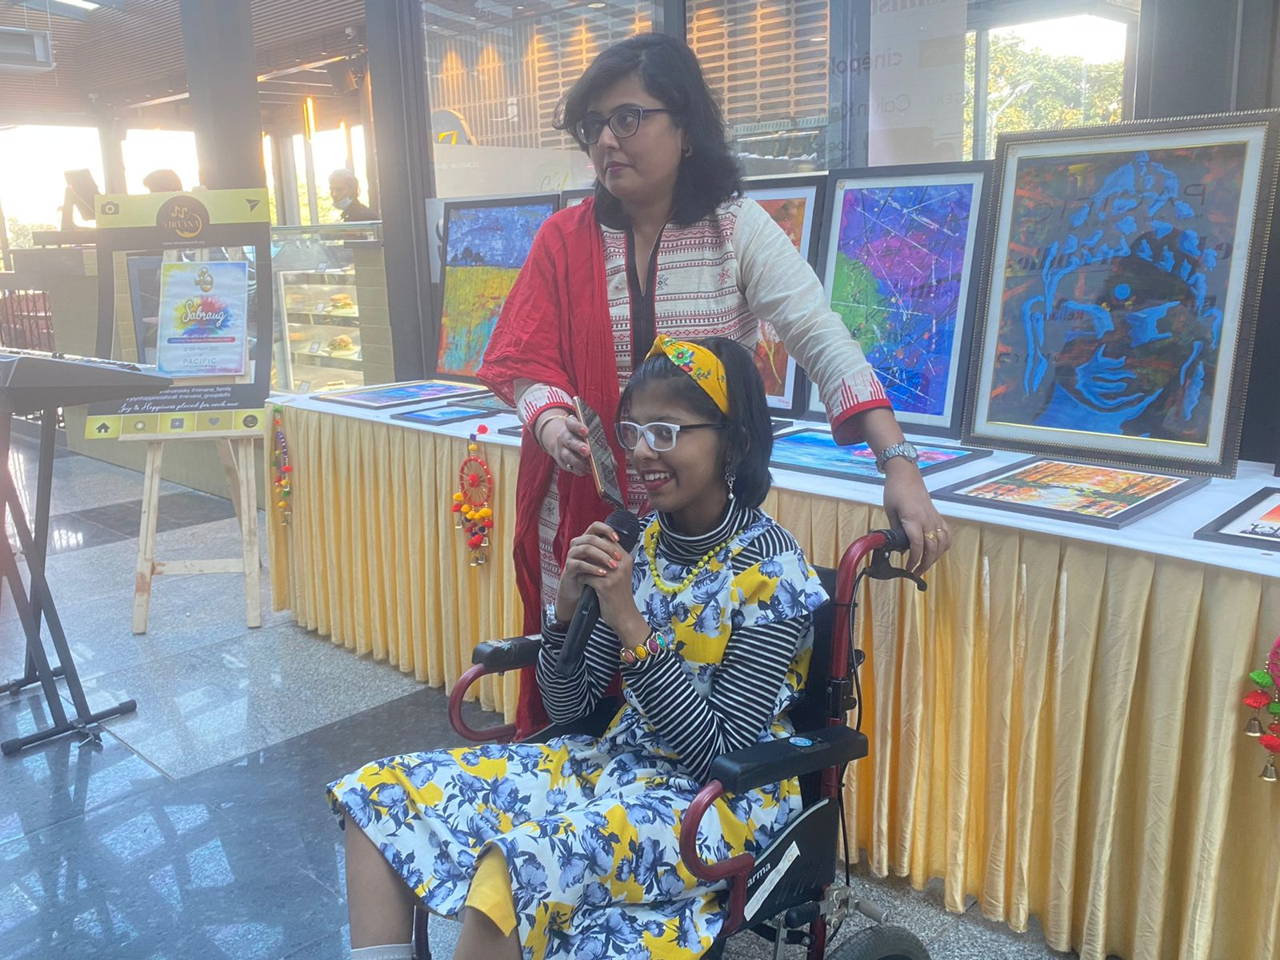 Spectacle event called ‘Sabrang’ organized by Pacific Mall, NSP to encourage talent of differently-abled kids